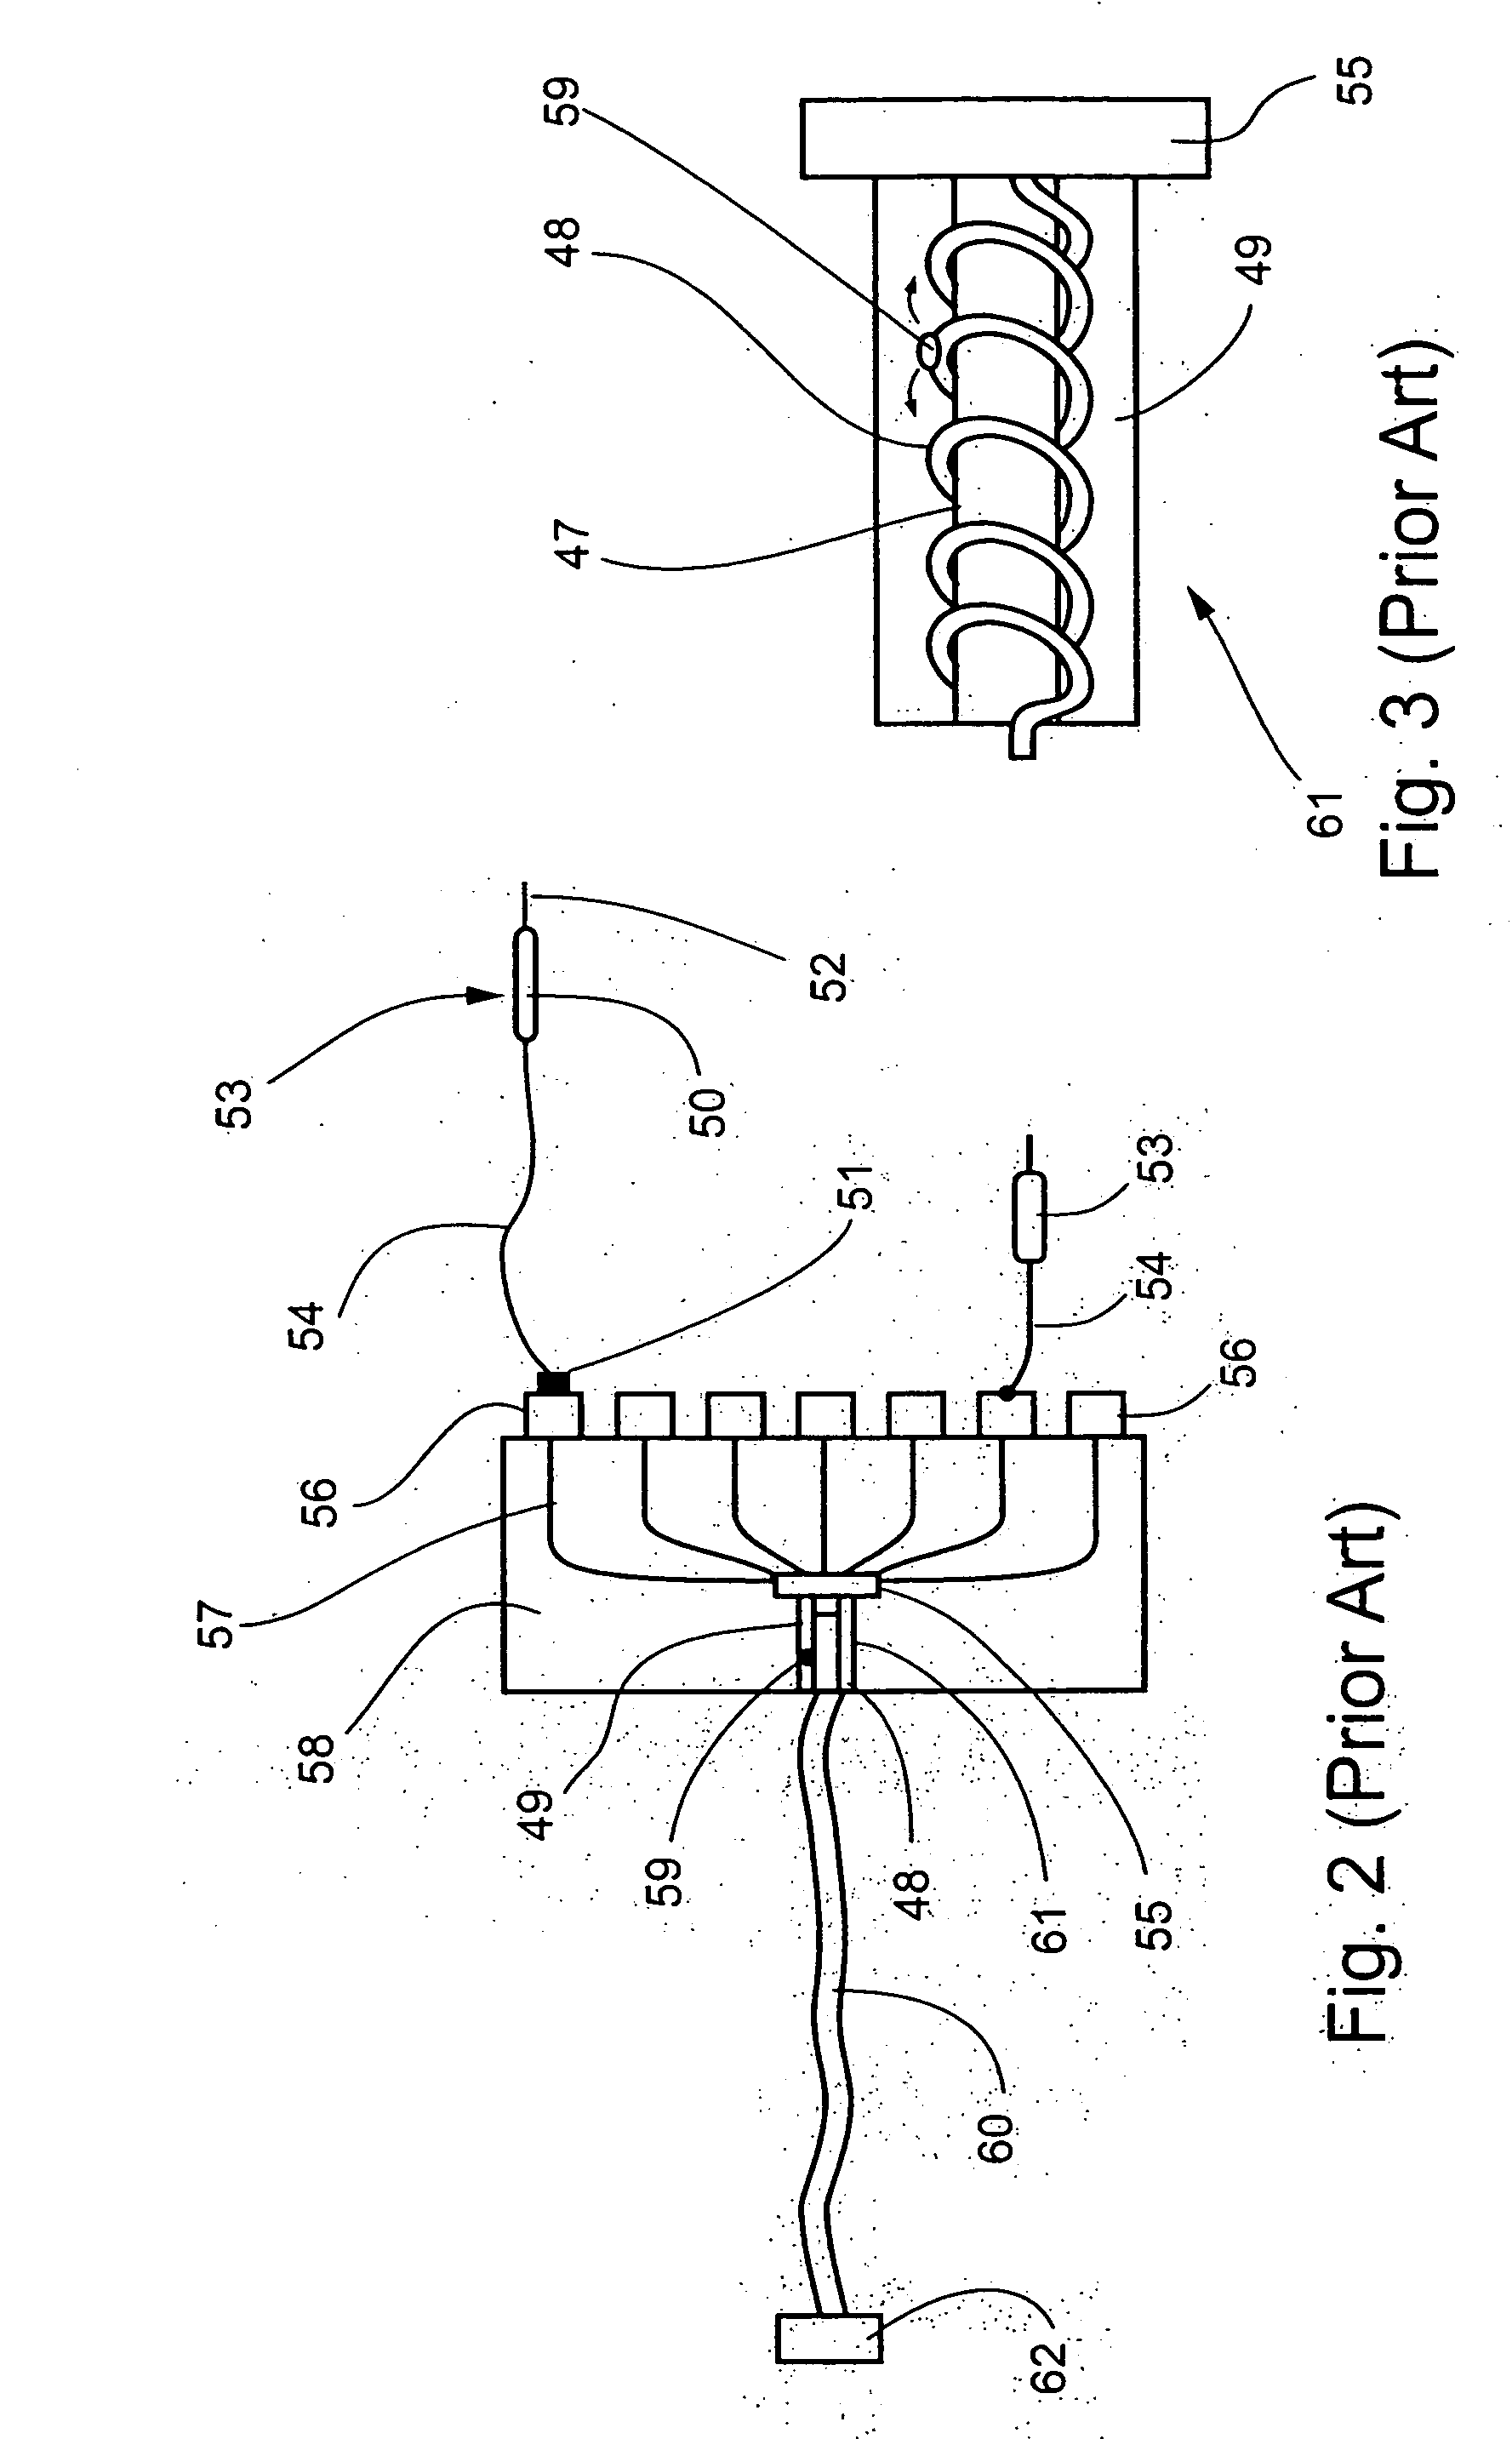 Apparatus and method for cryosurgery within a body cavity